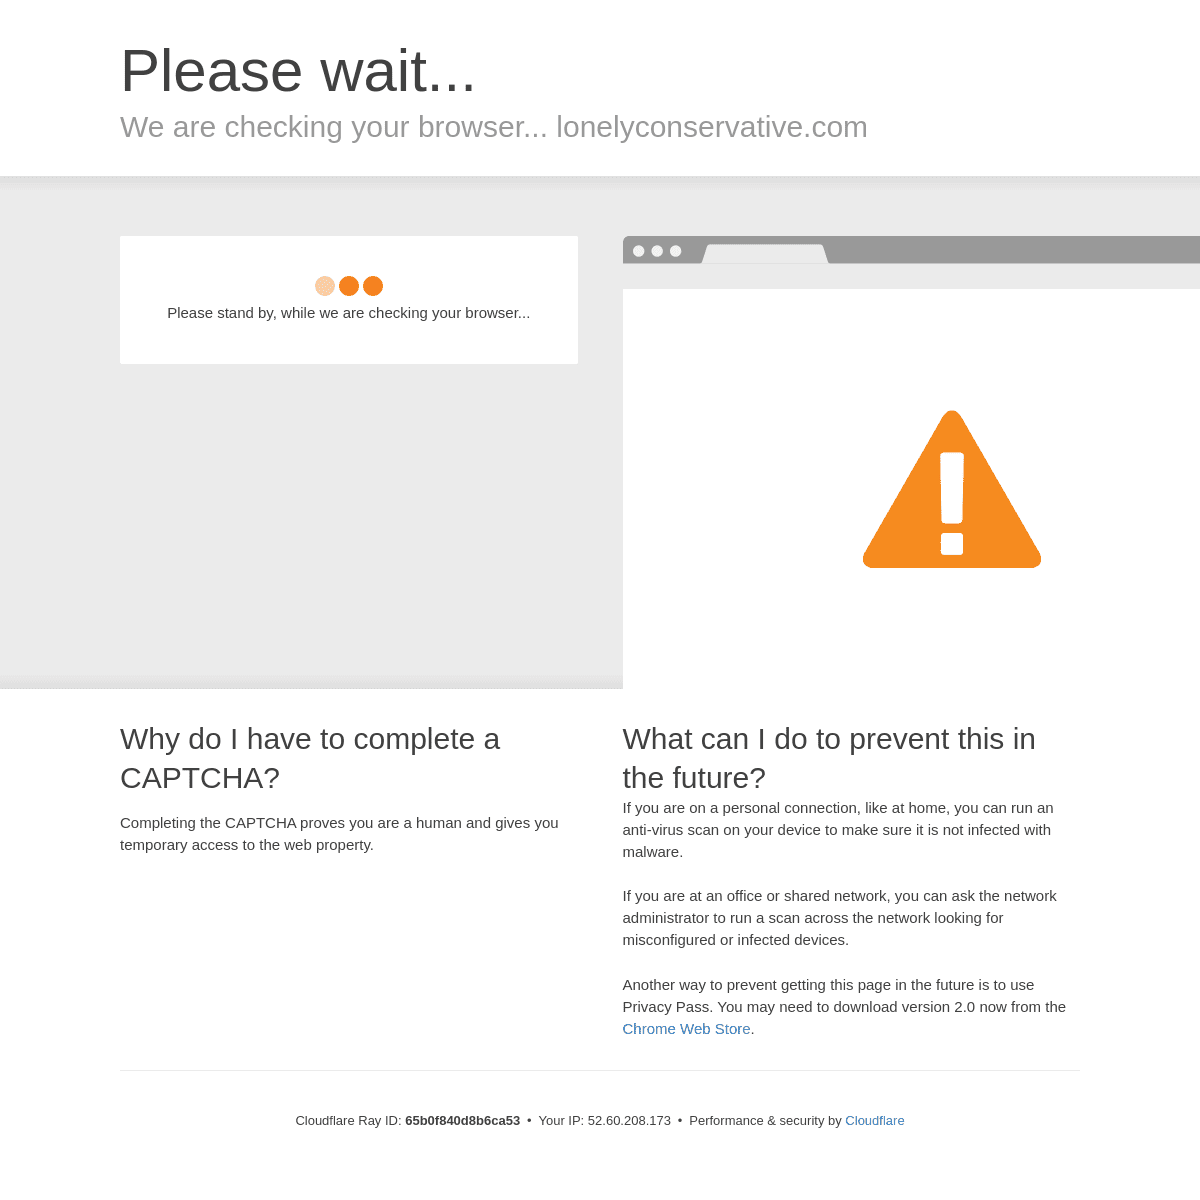 A complete backup of https://lonelyconservative.com